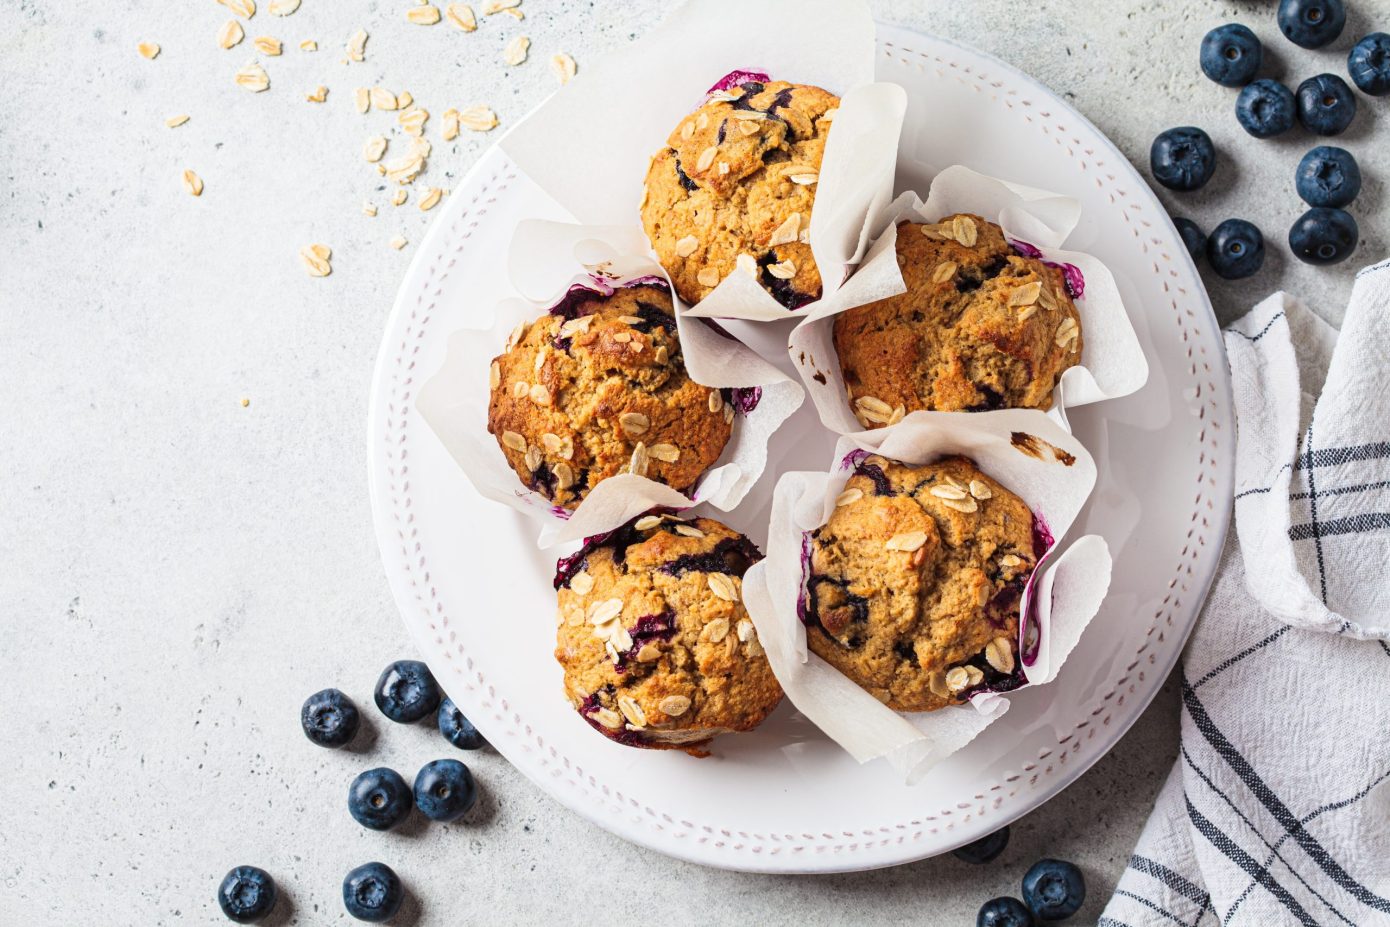 Peanut granola and blueberry muffins on plate